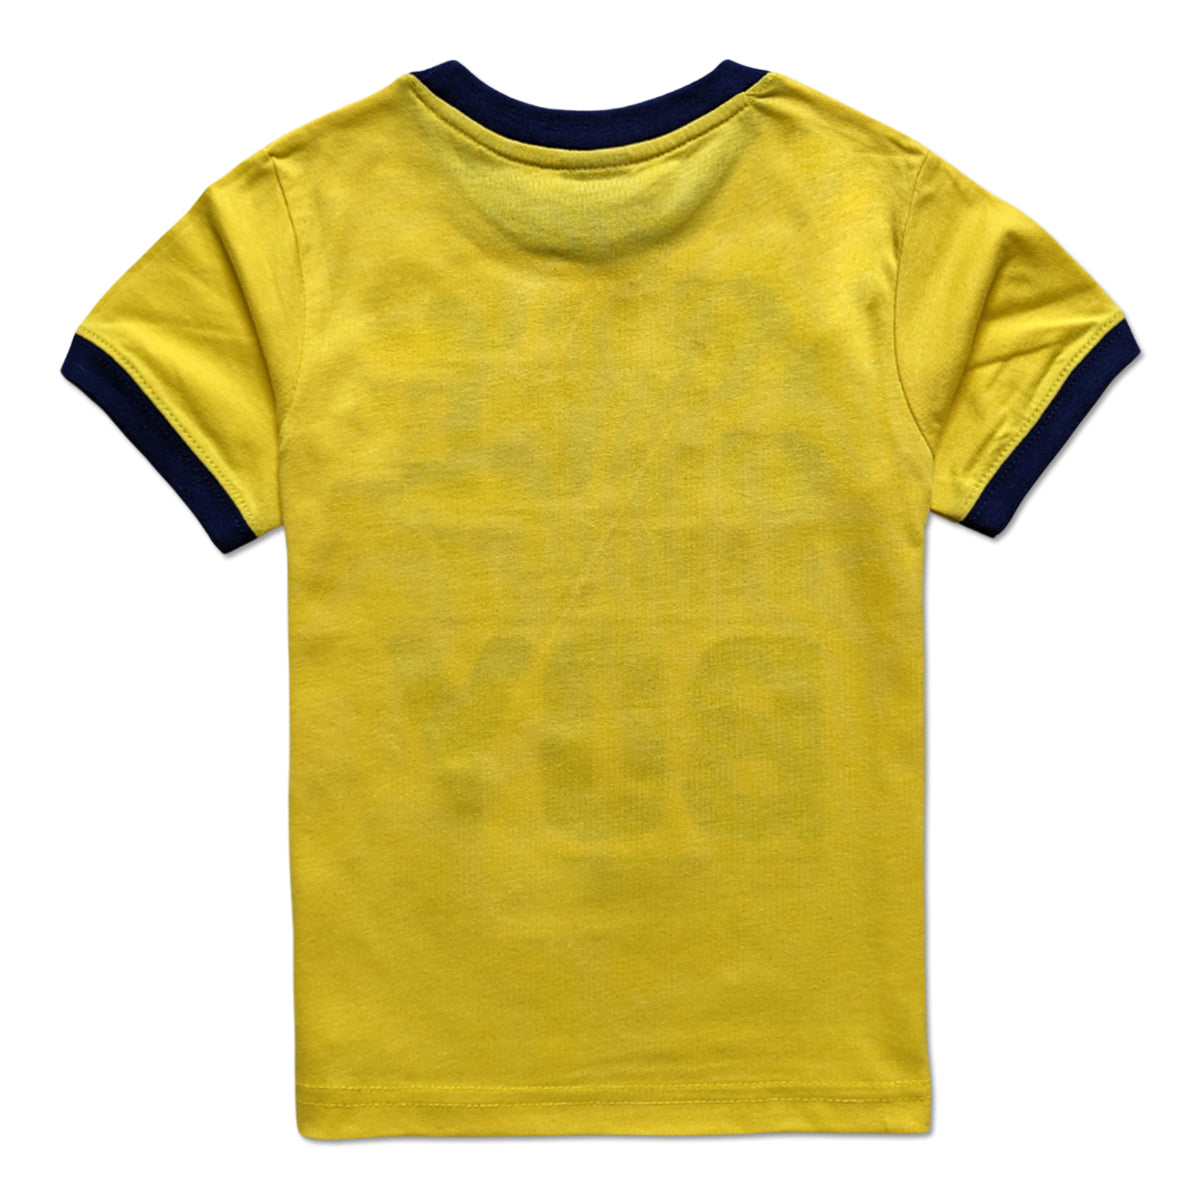 Brand Expo Premium Quality Branded Half Sleeves T-Shirt for Boy's